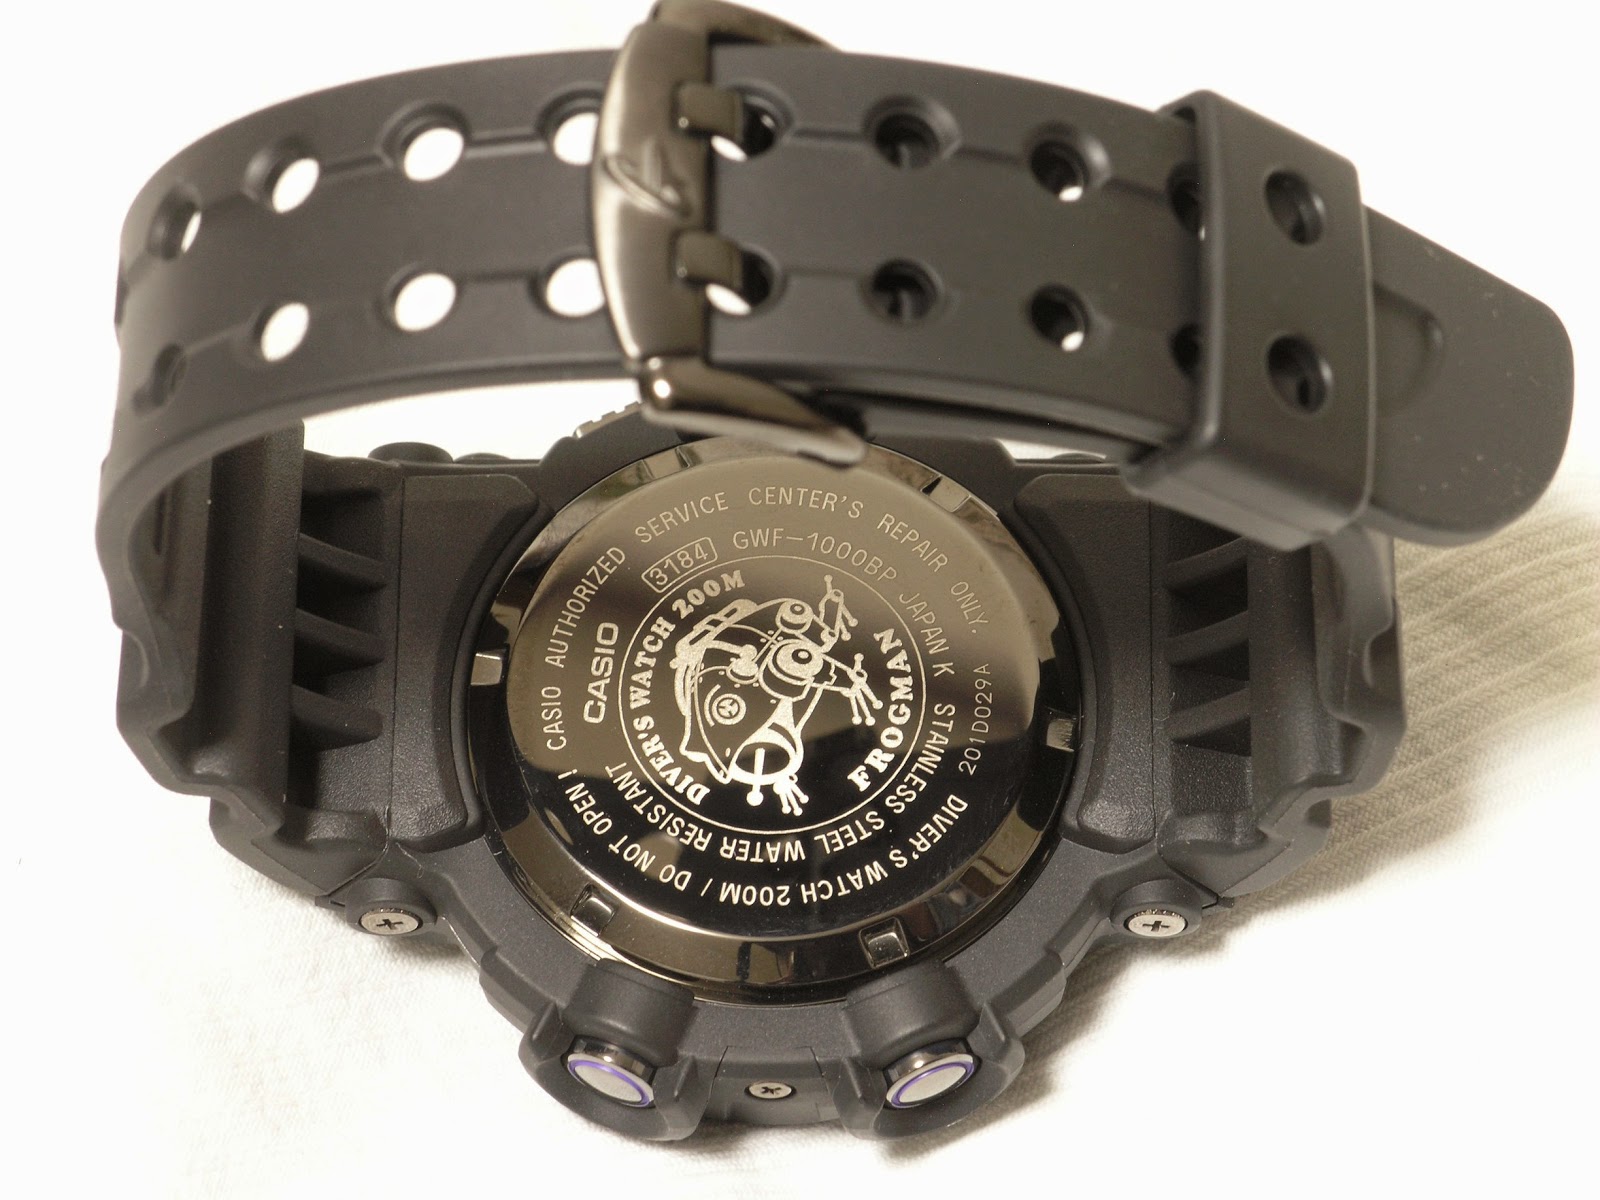 Technical Equipment Reviews: What is a Scuba Diver's Watch?